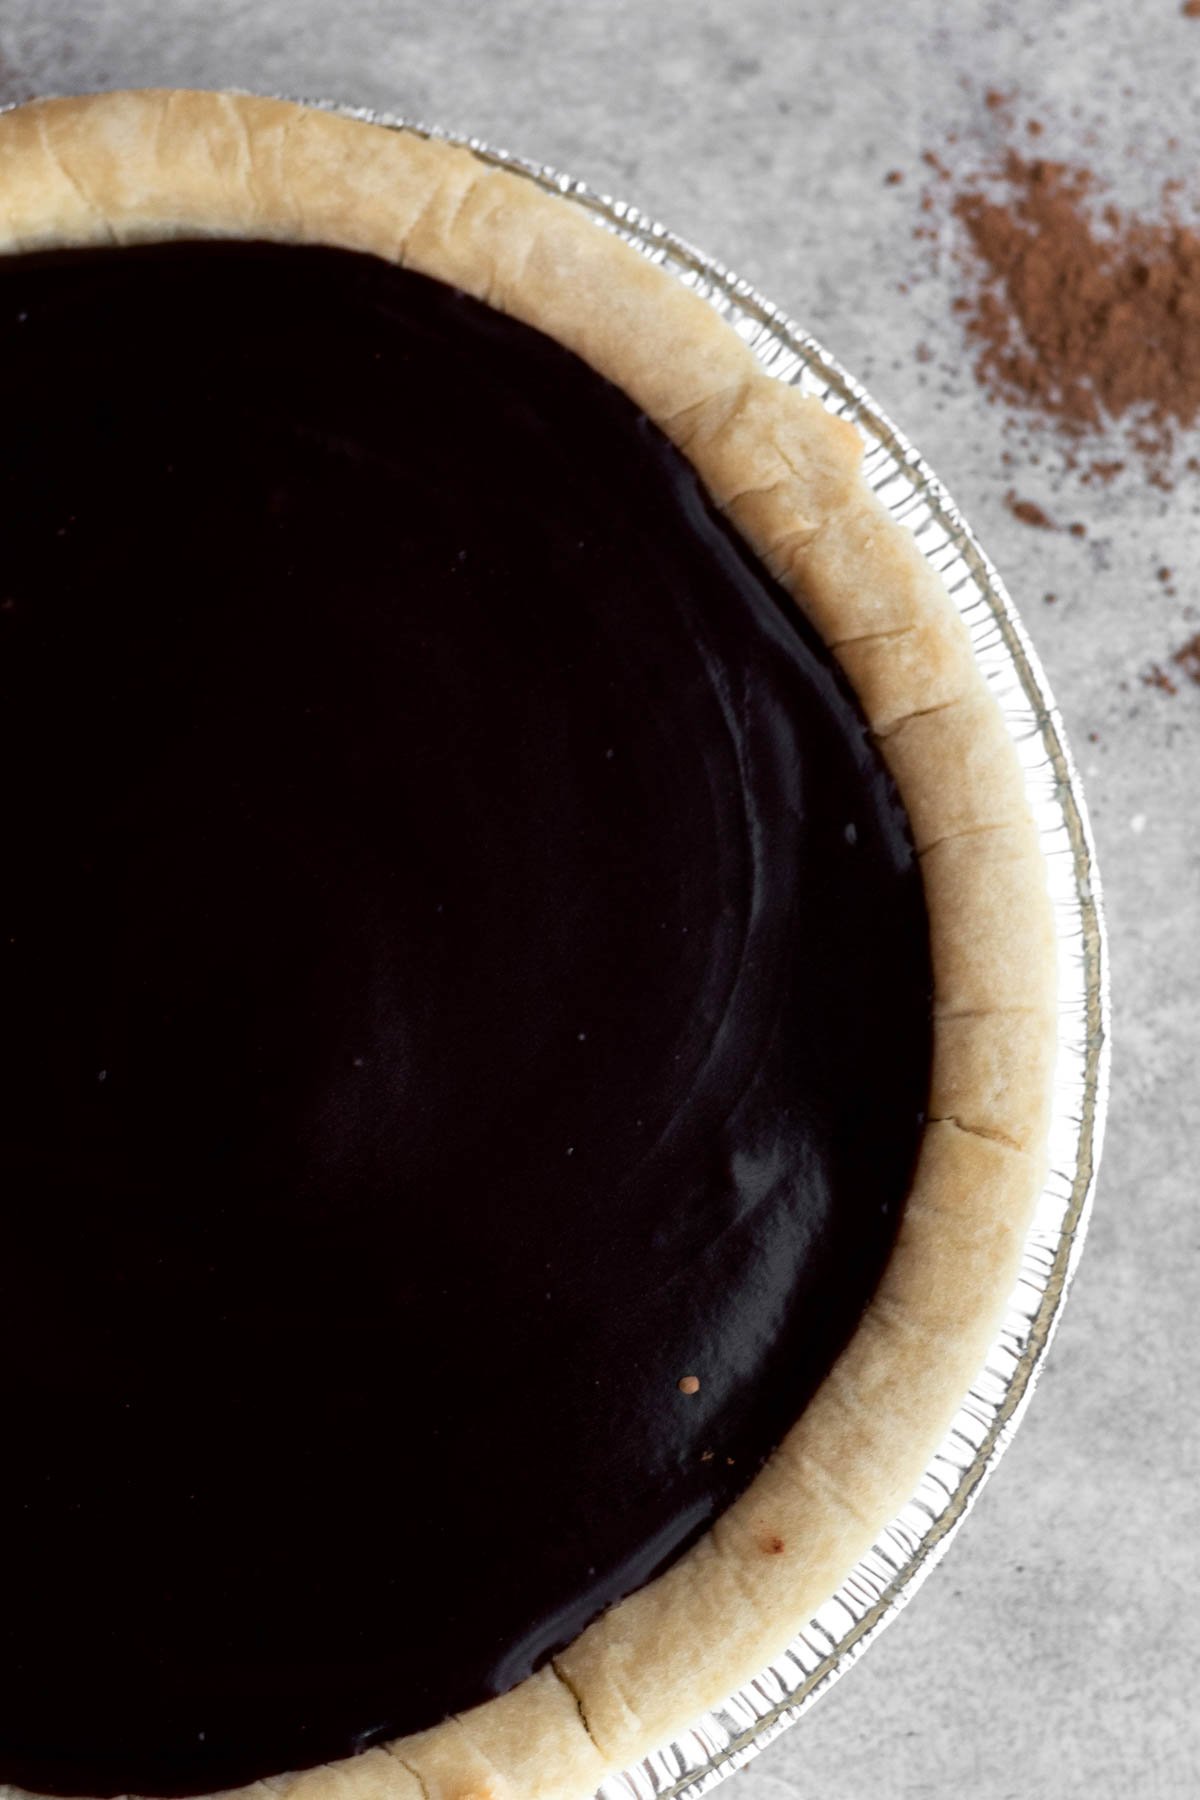 Smooth pudding fills the pie crust.